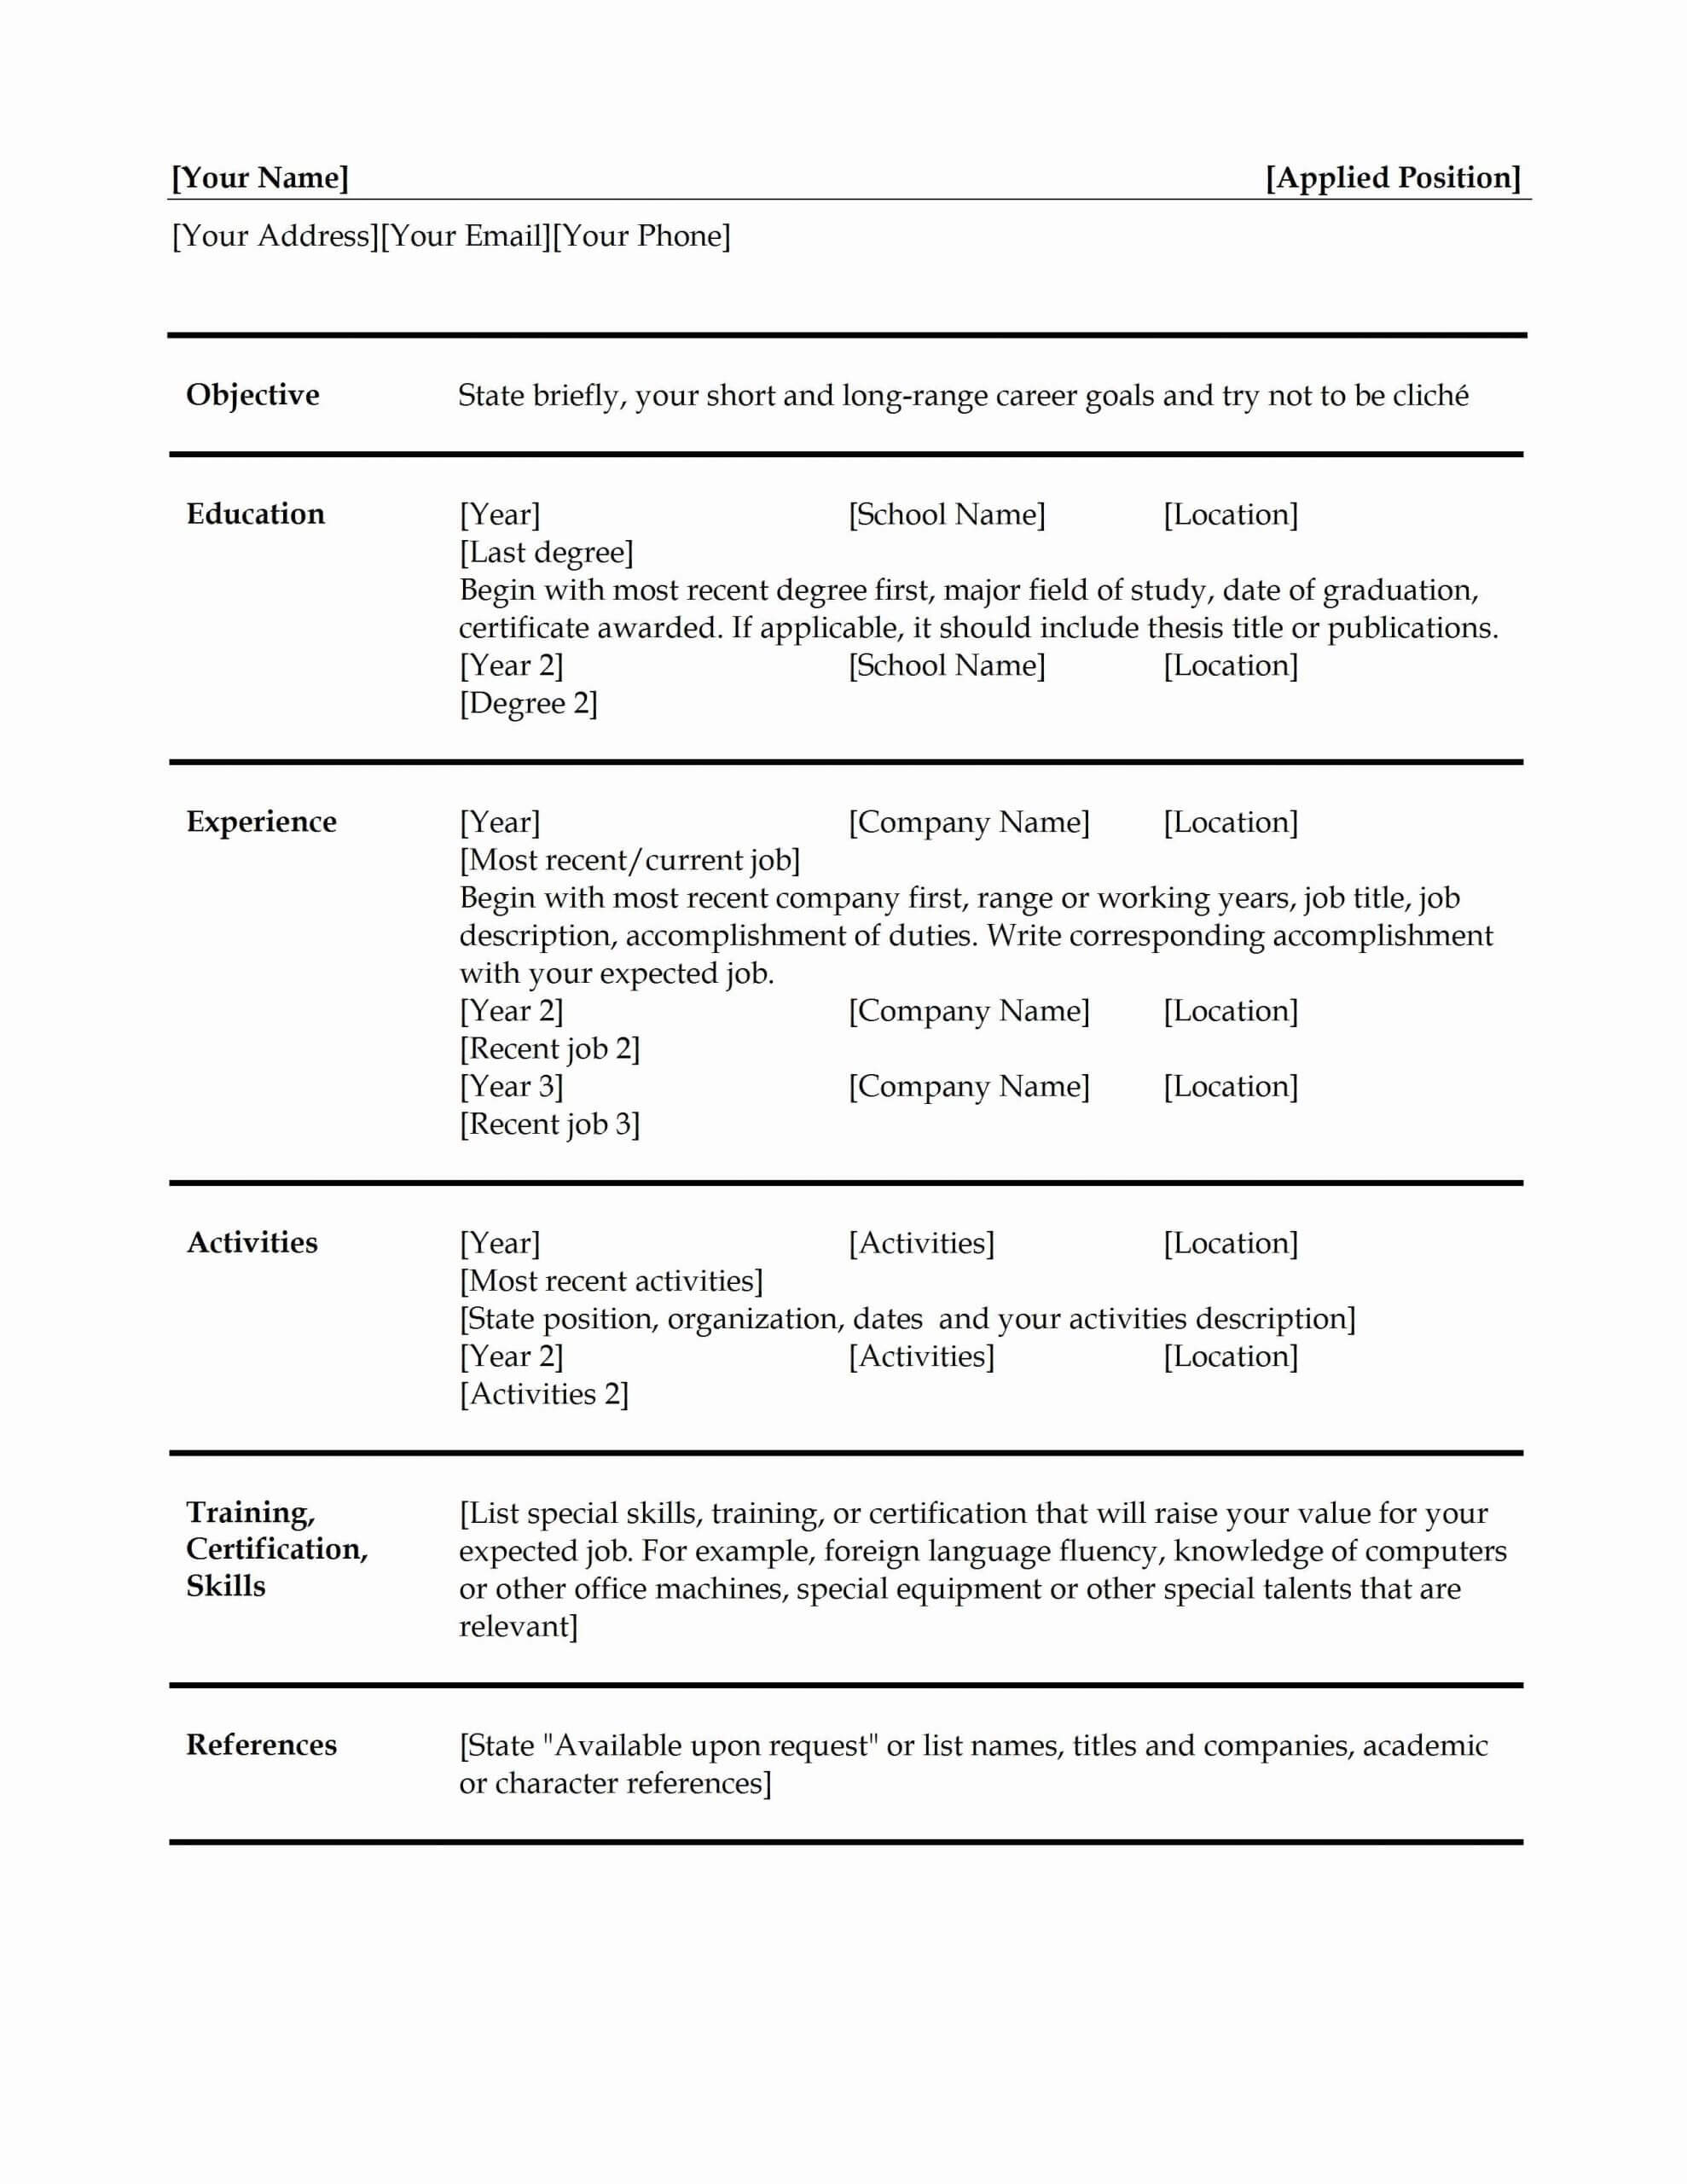 Conflict Minerals Reporting Template - Best Sample Template throughout Conflict Minerals Policy Statement Template